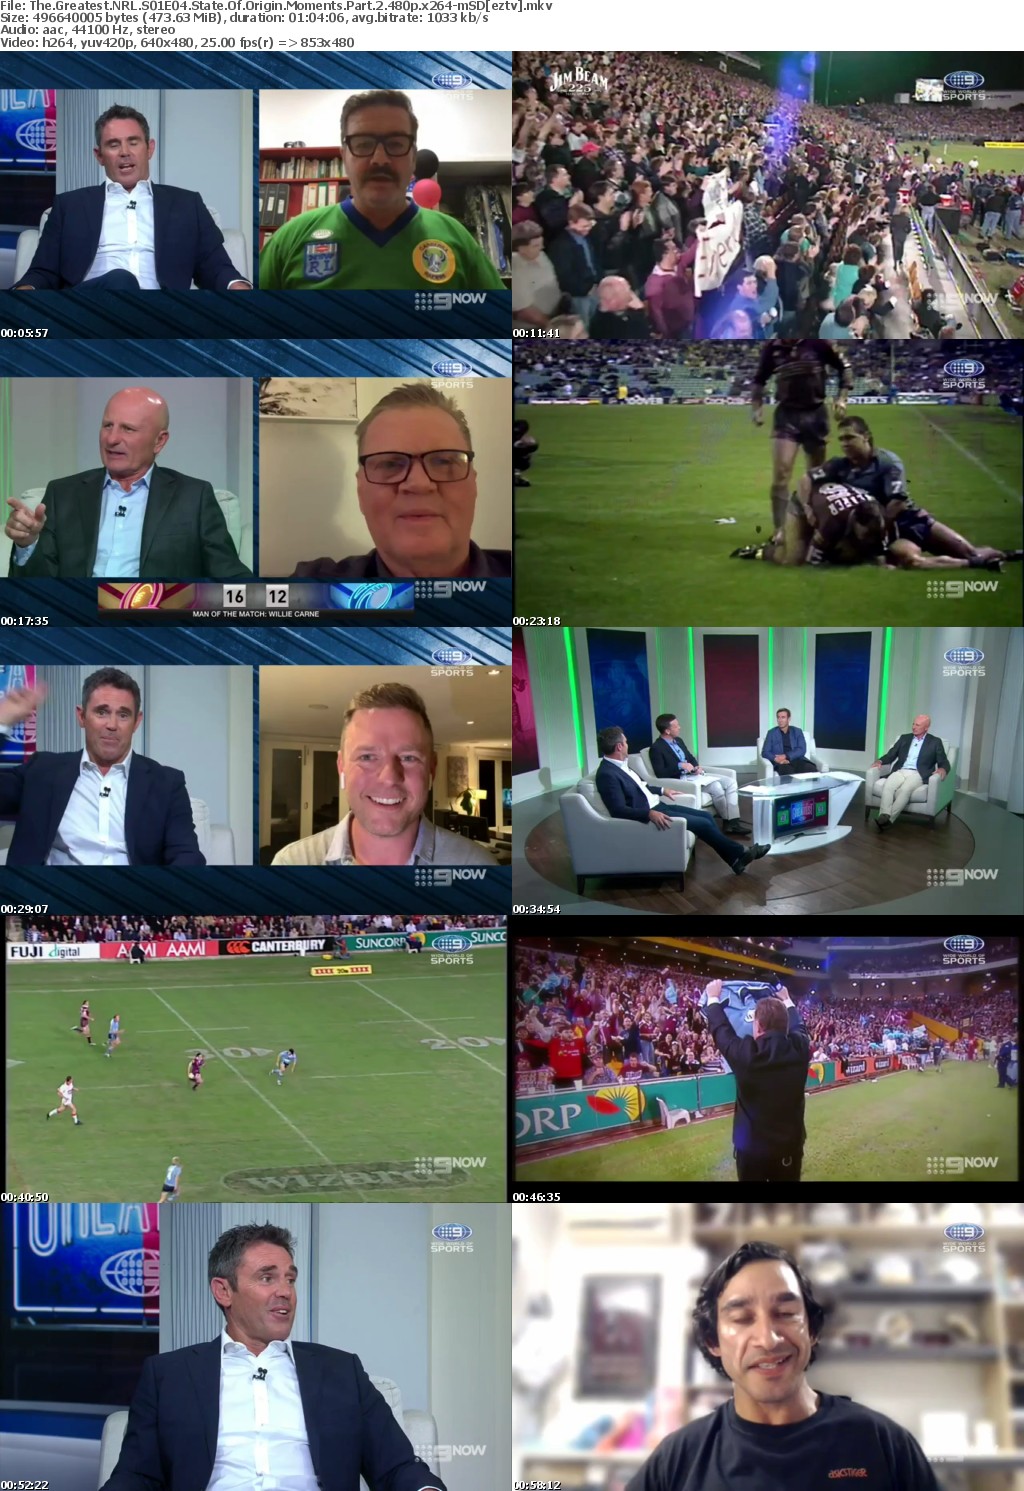 The Greatest NRL S01E04 State Of Origin Moments Part 2 480p x264-mSD